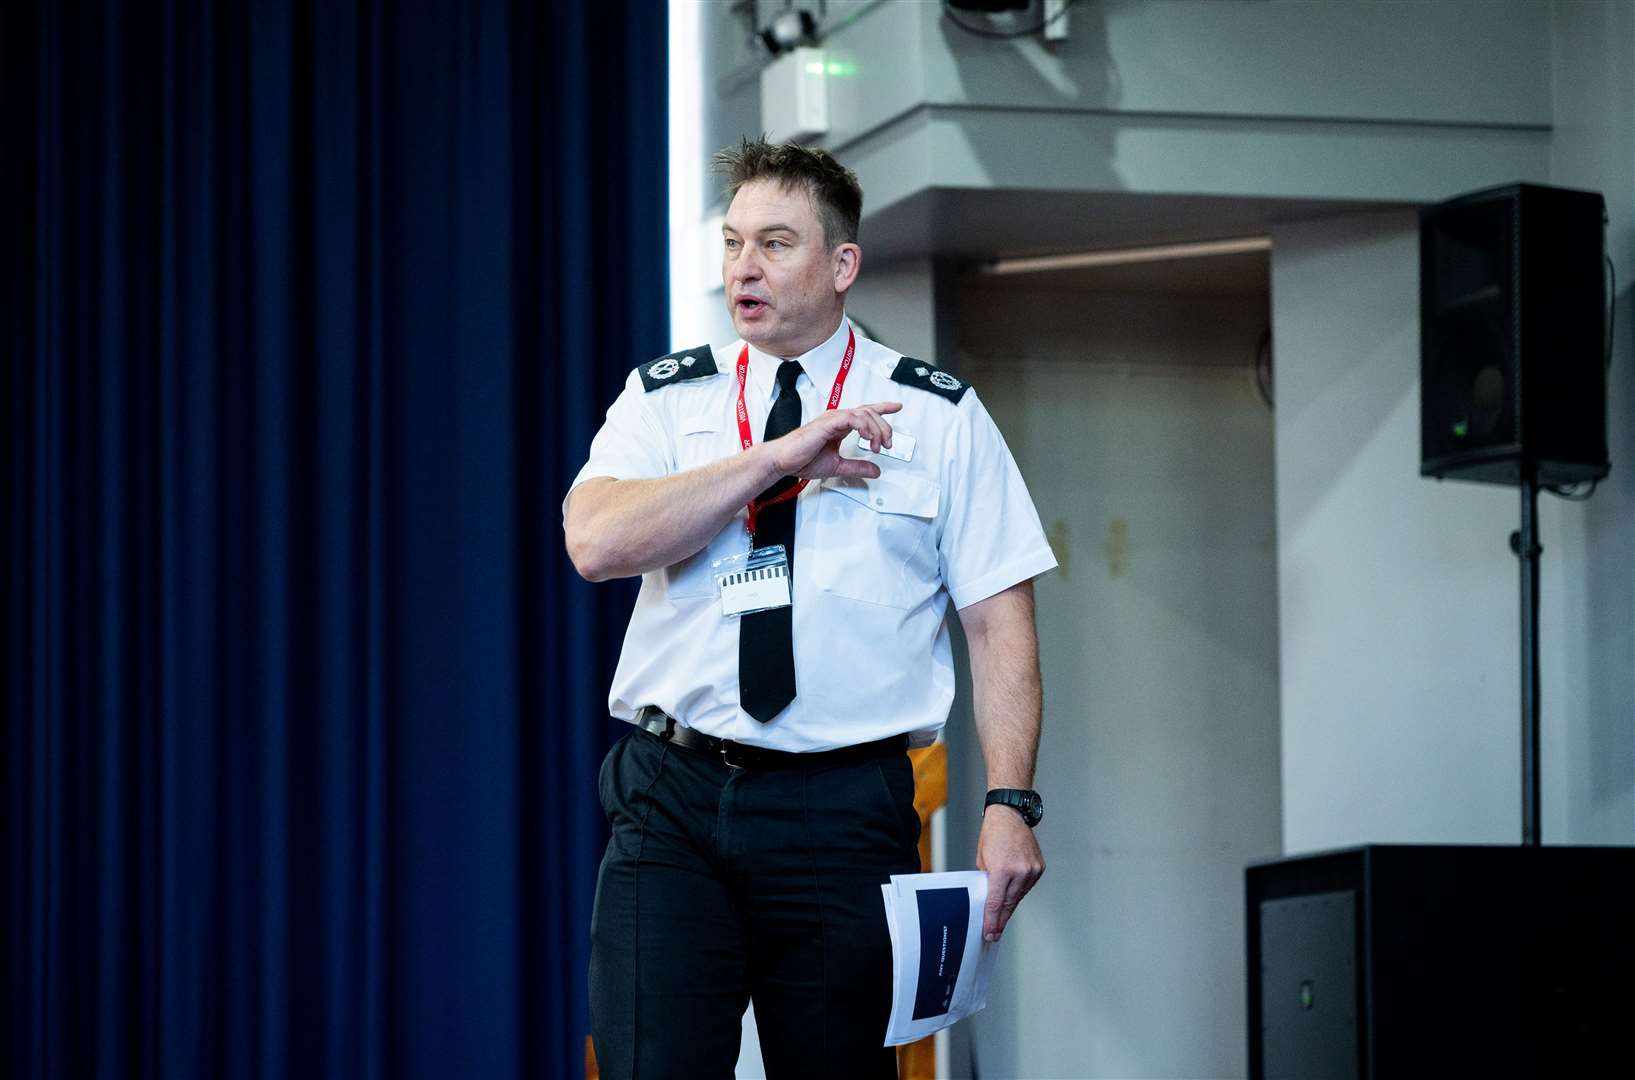 Detective Chief Constable Simon Megicks spoke about his career to pupils at Springwood High School.